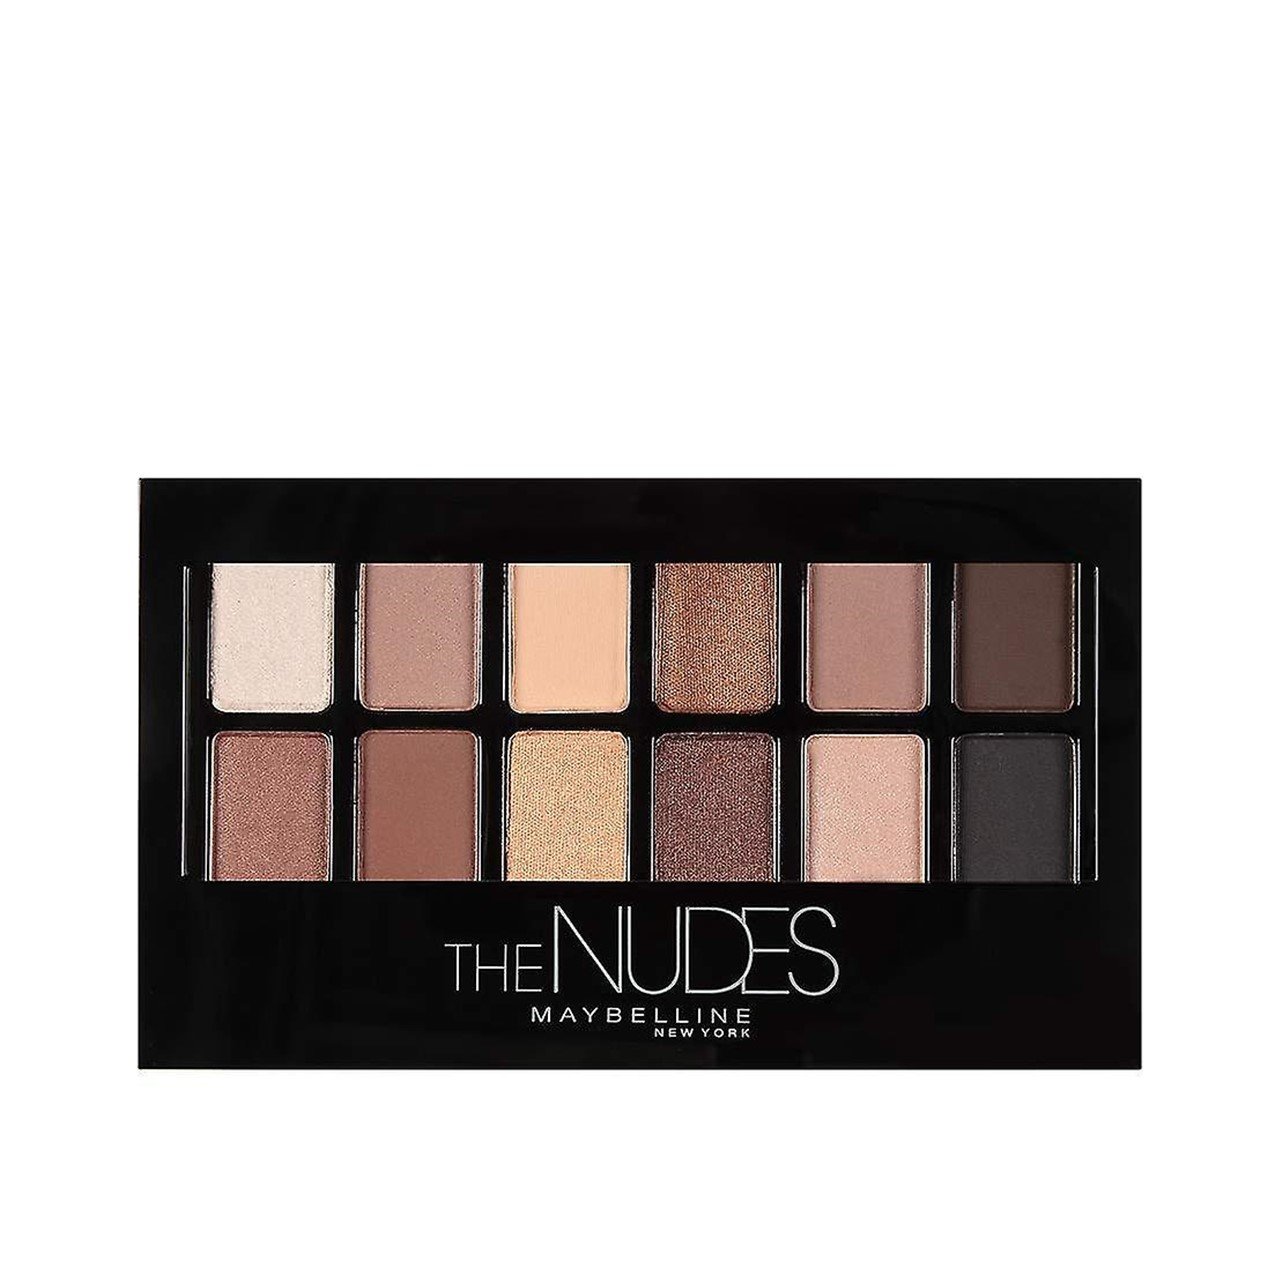 Maybelline The Nudes Eye Shadow Palette 9.6g (0.34oz)